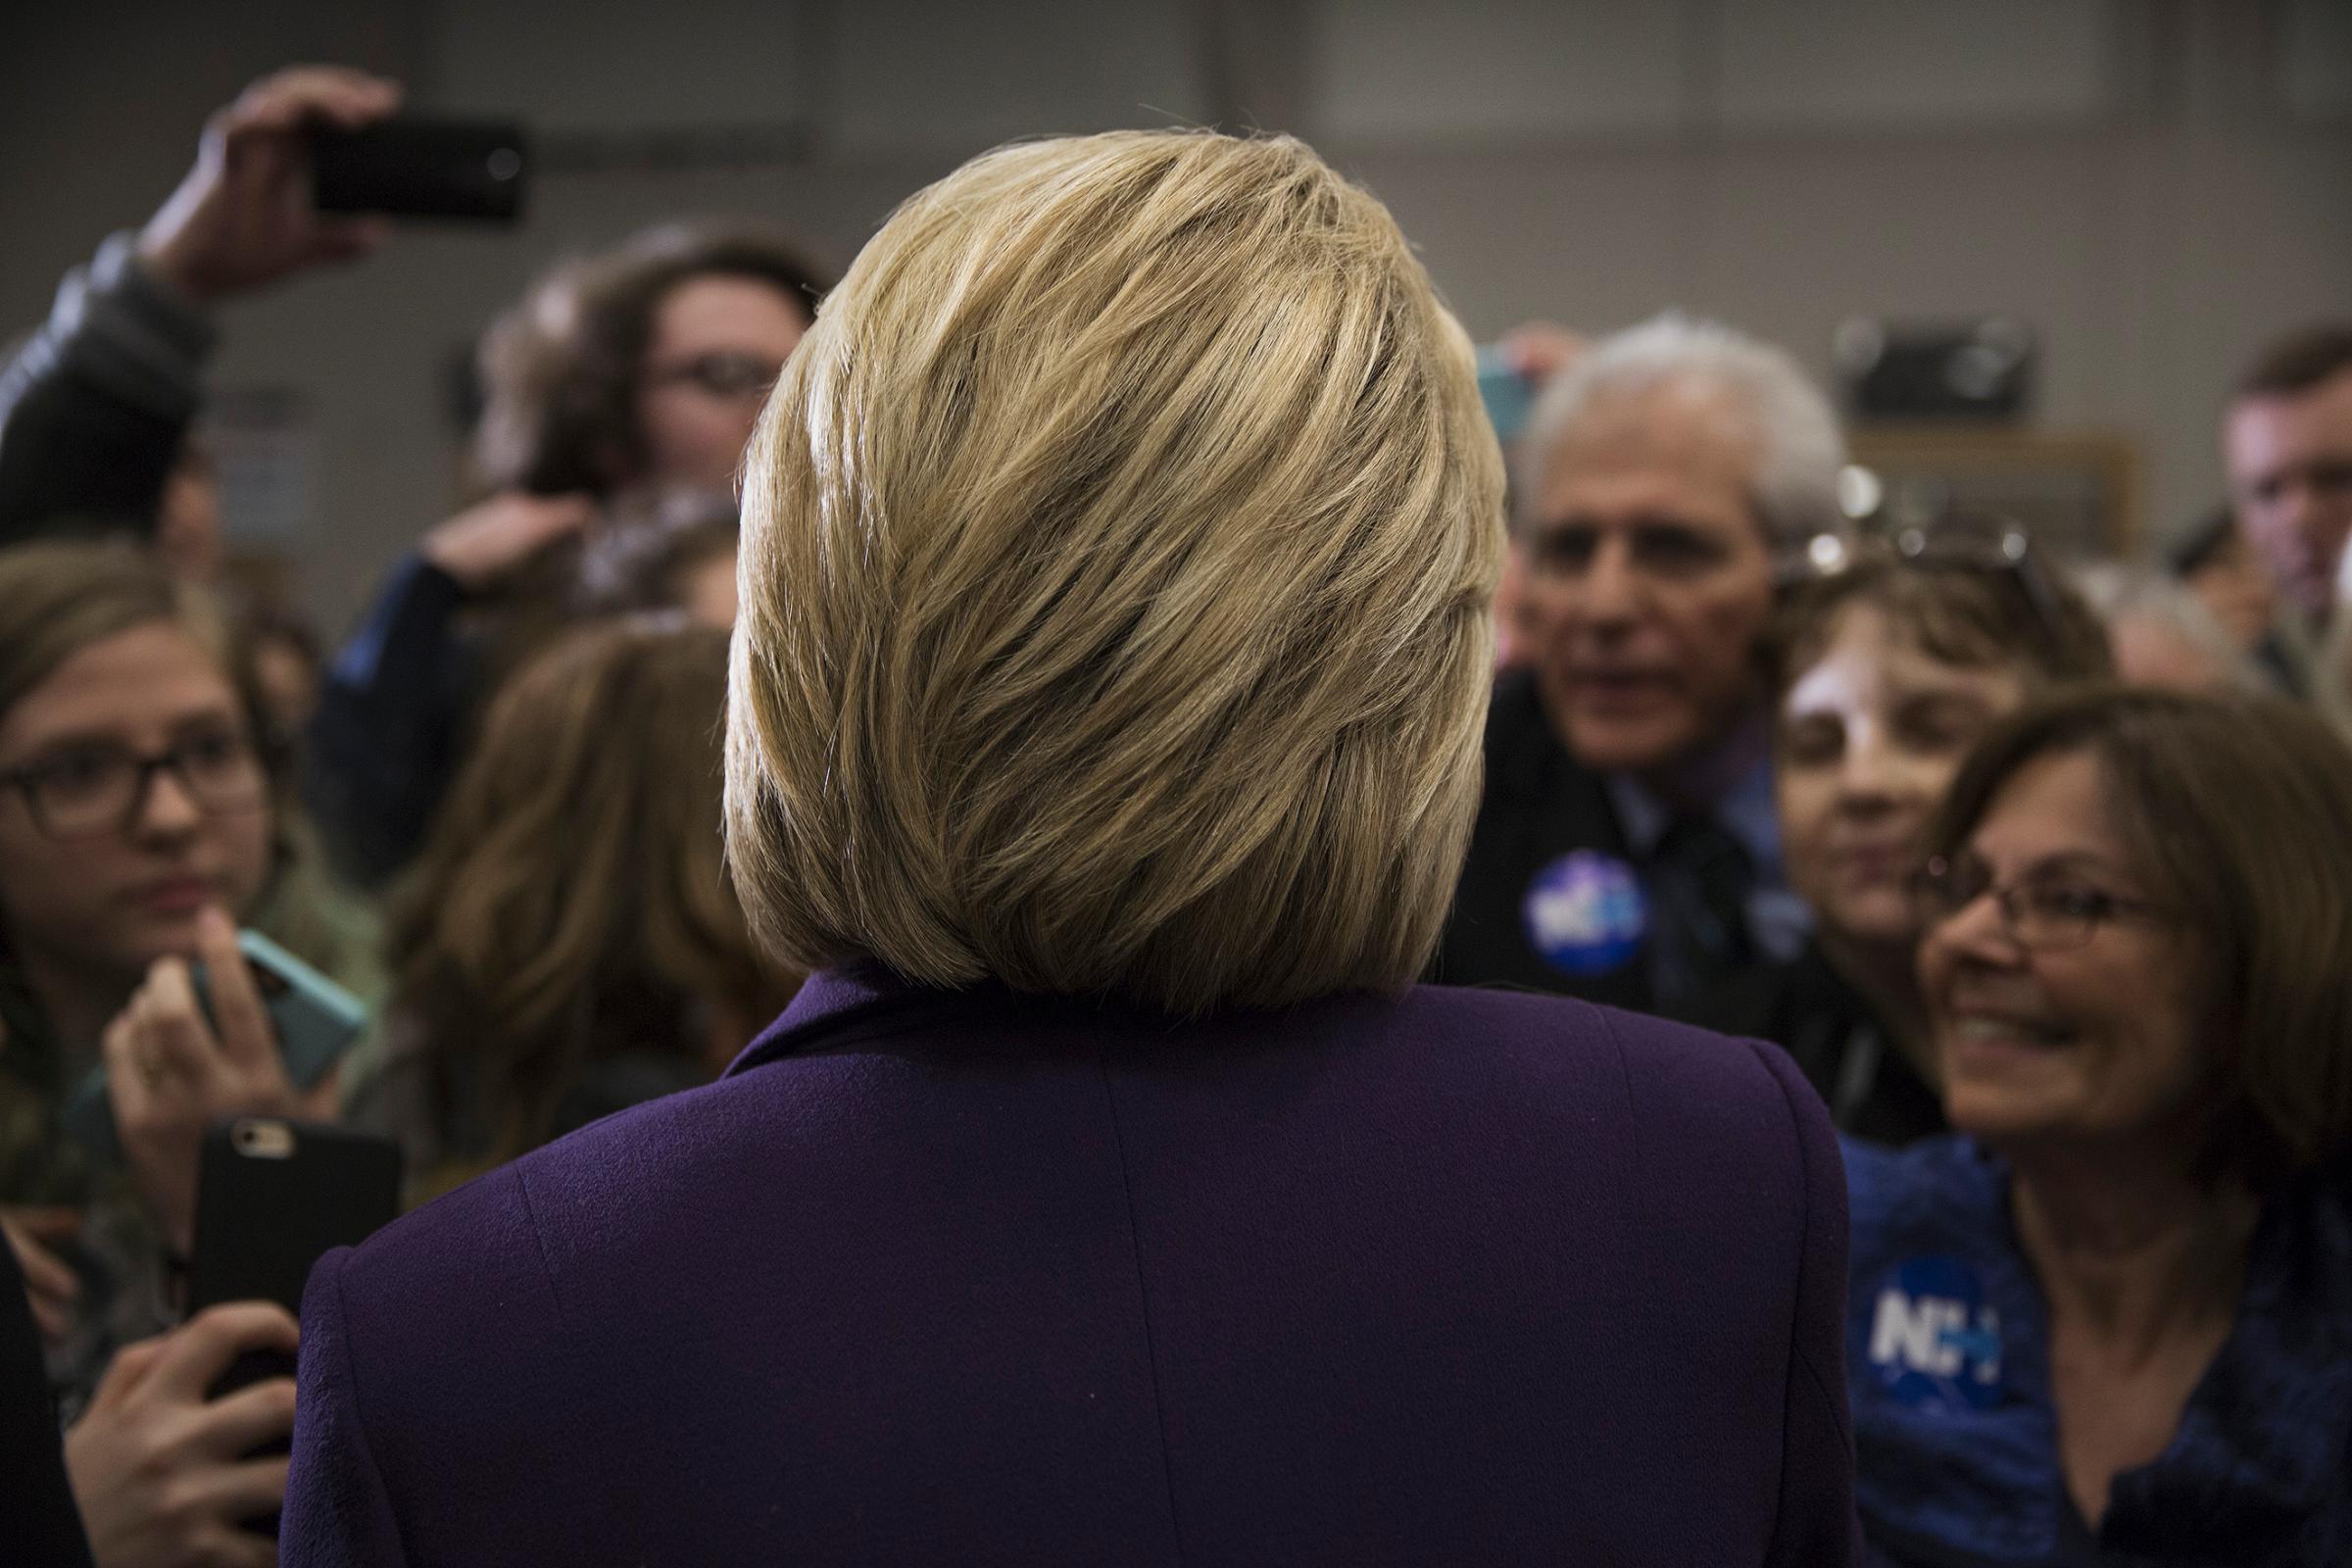 Hillary Clinton campaigning in New Hampshire presidential primary. Winnacunnet High School, Hampton, NH. Being interviewed by Joe Klein of TIME Magazine.by James Nachtwey